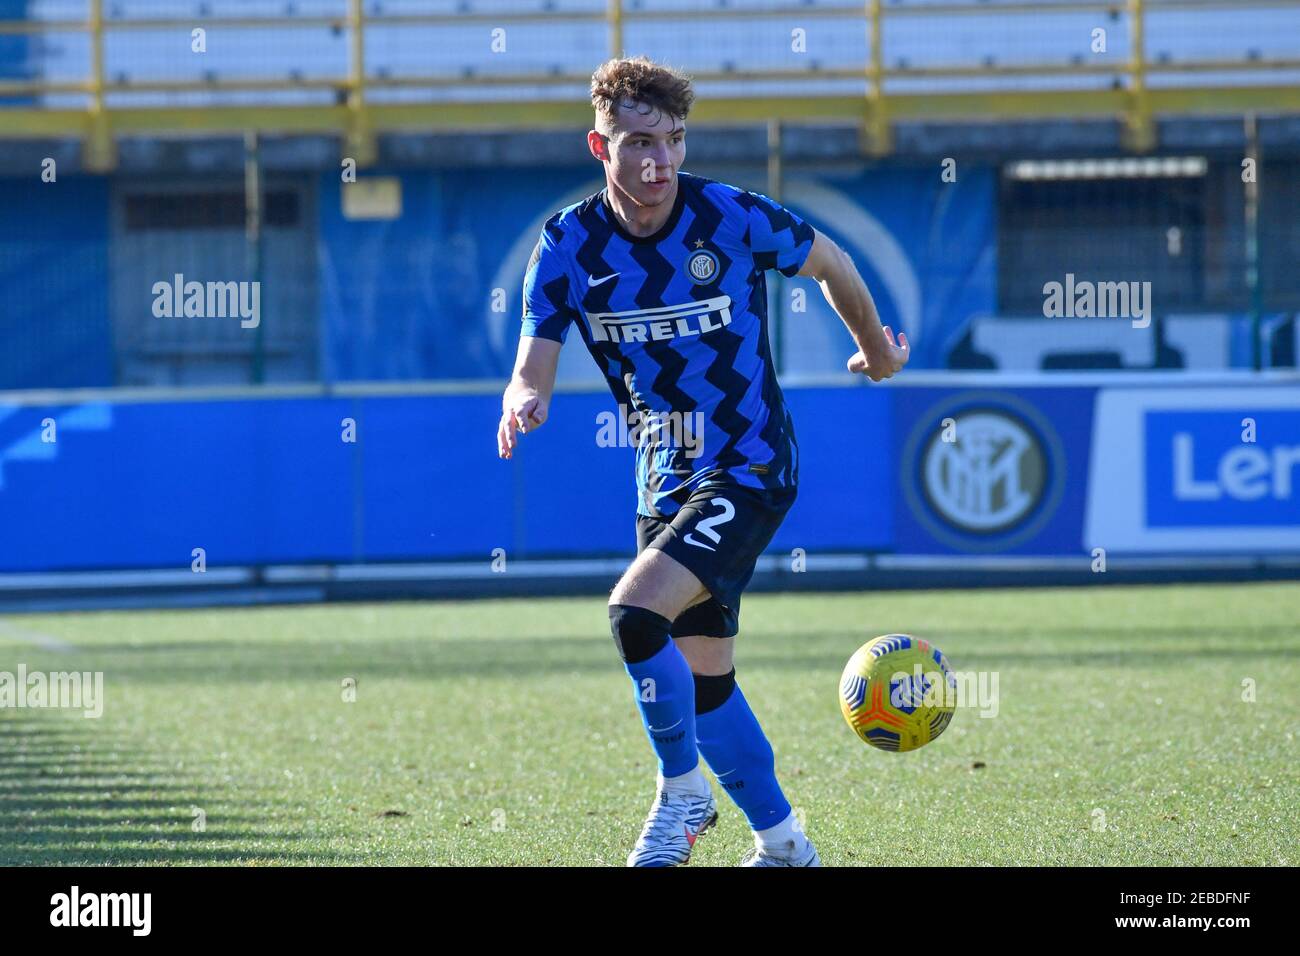 Milan, Italy. 11th, February 2021. Tibo Persyn (2) of Inter U-19 seen  during the Campionato Primavera 1 match between Inter and Roma at the  Suning Youth Development Centre, Milan. (Photo credit: Gonzales